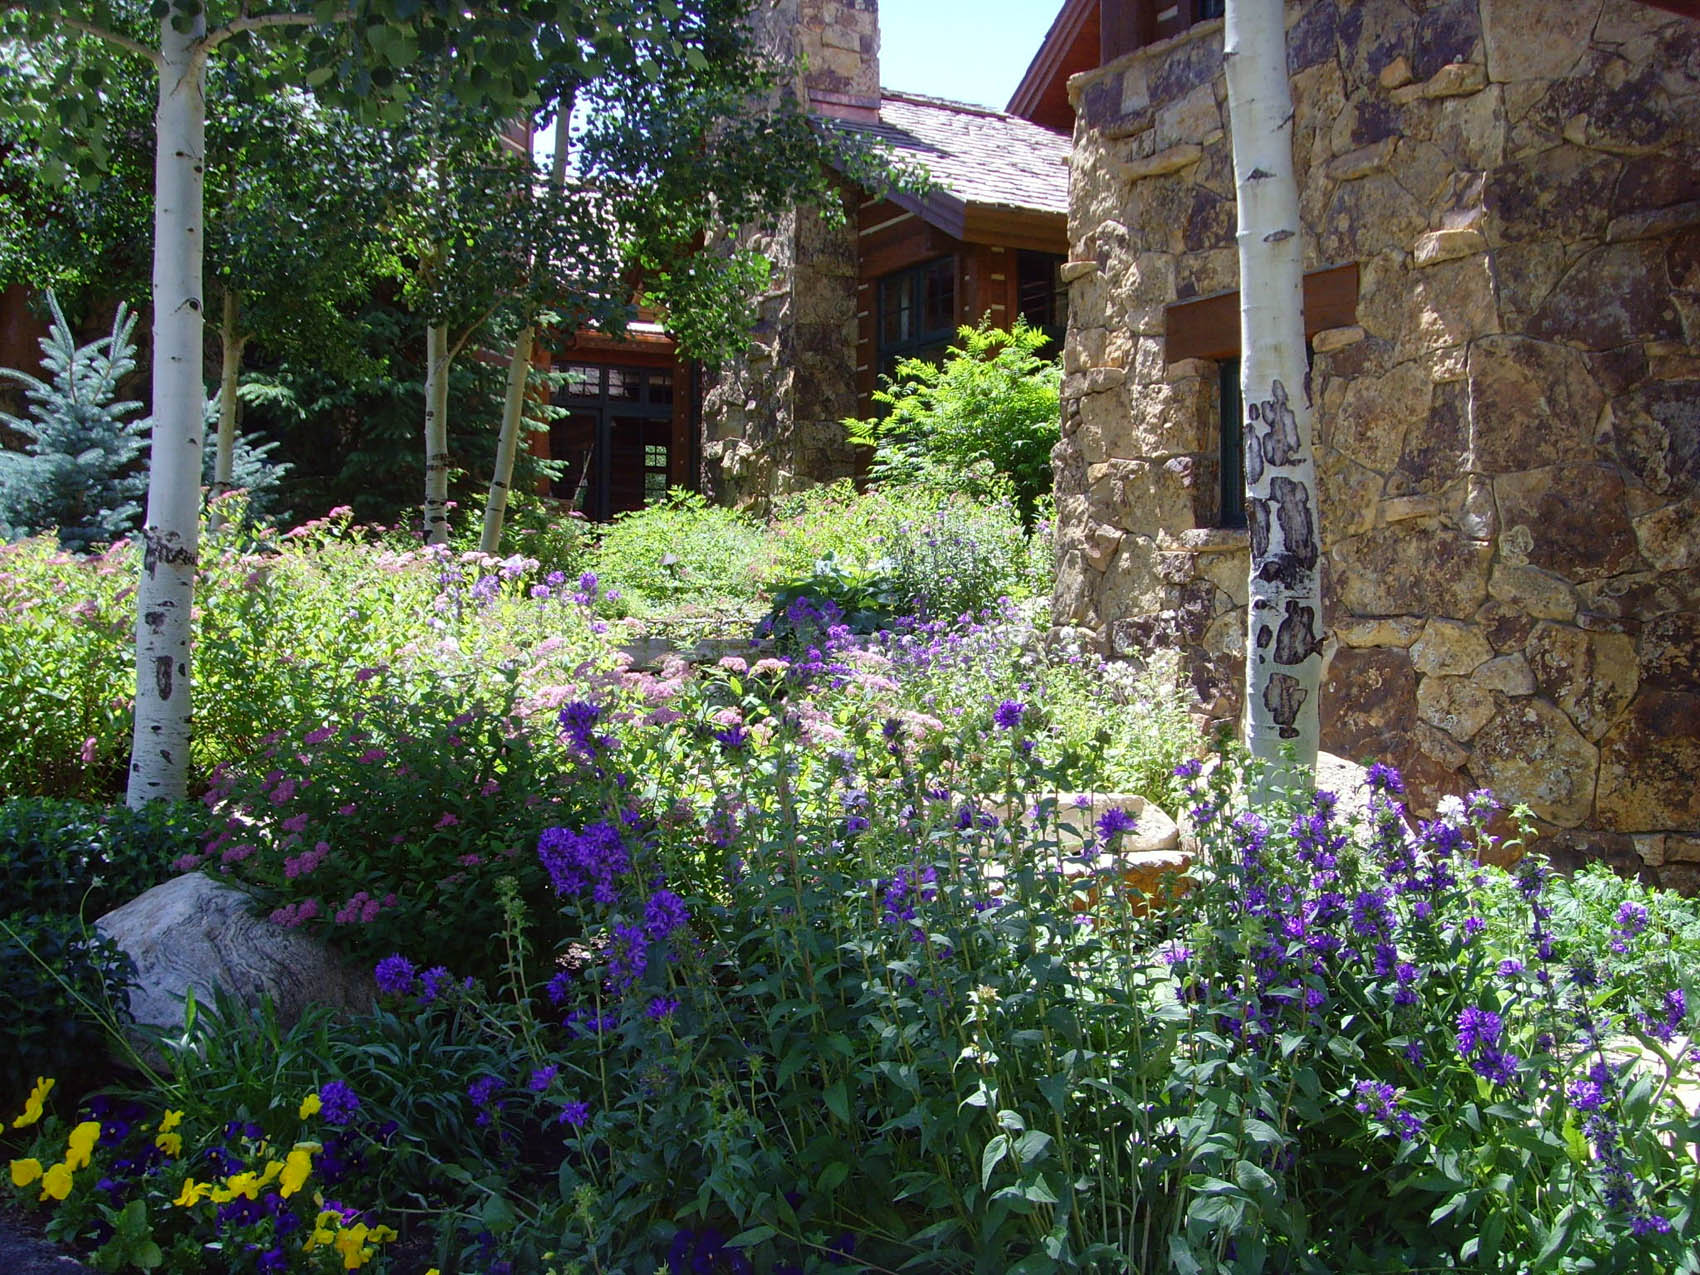 A rustic stone building with large windows is nestled among birch trees and a colorful garden of purple, pink, and yellow flowers in sunny daylight.